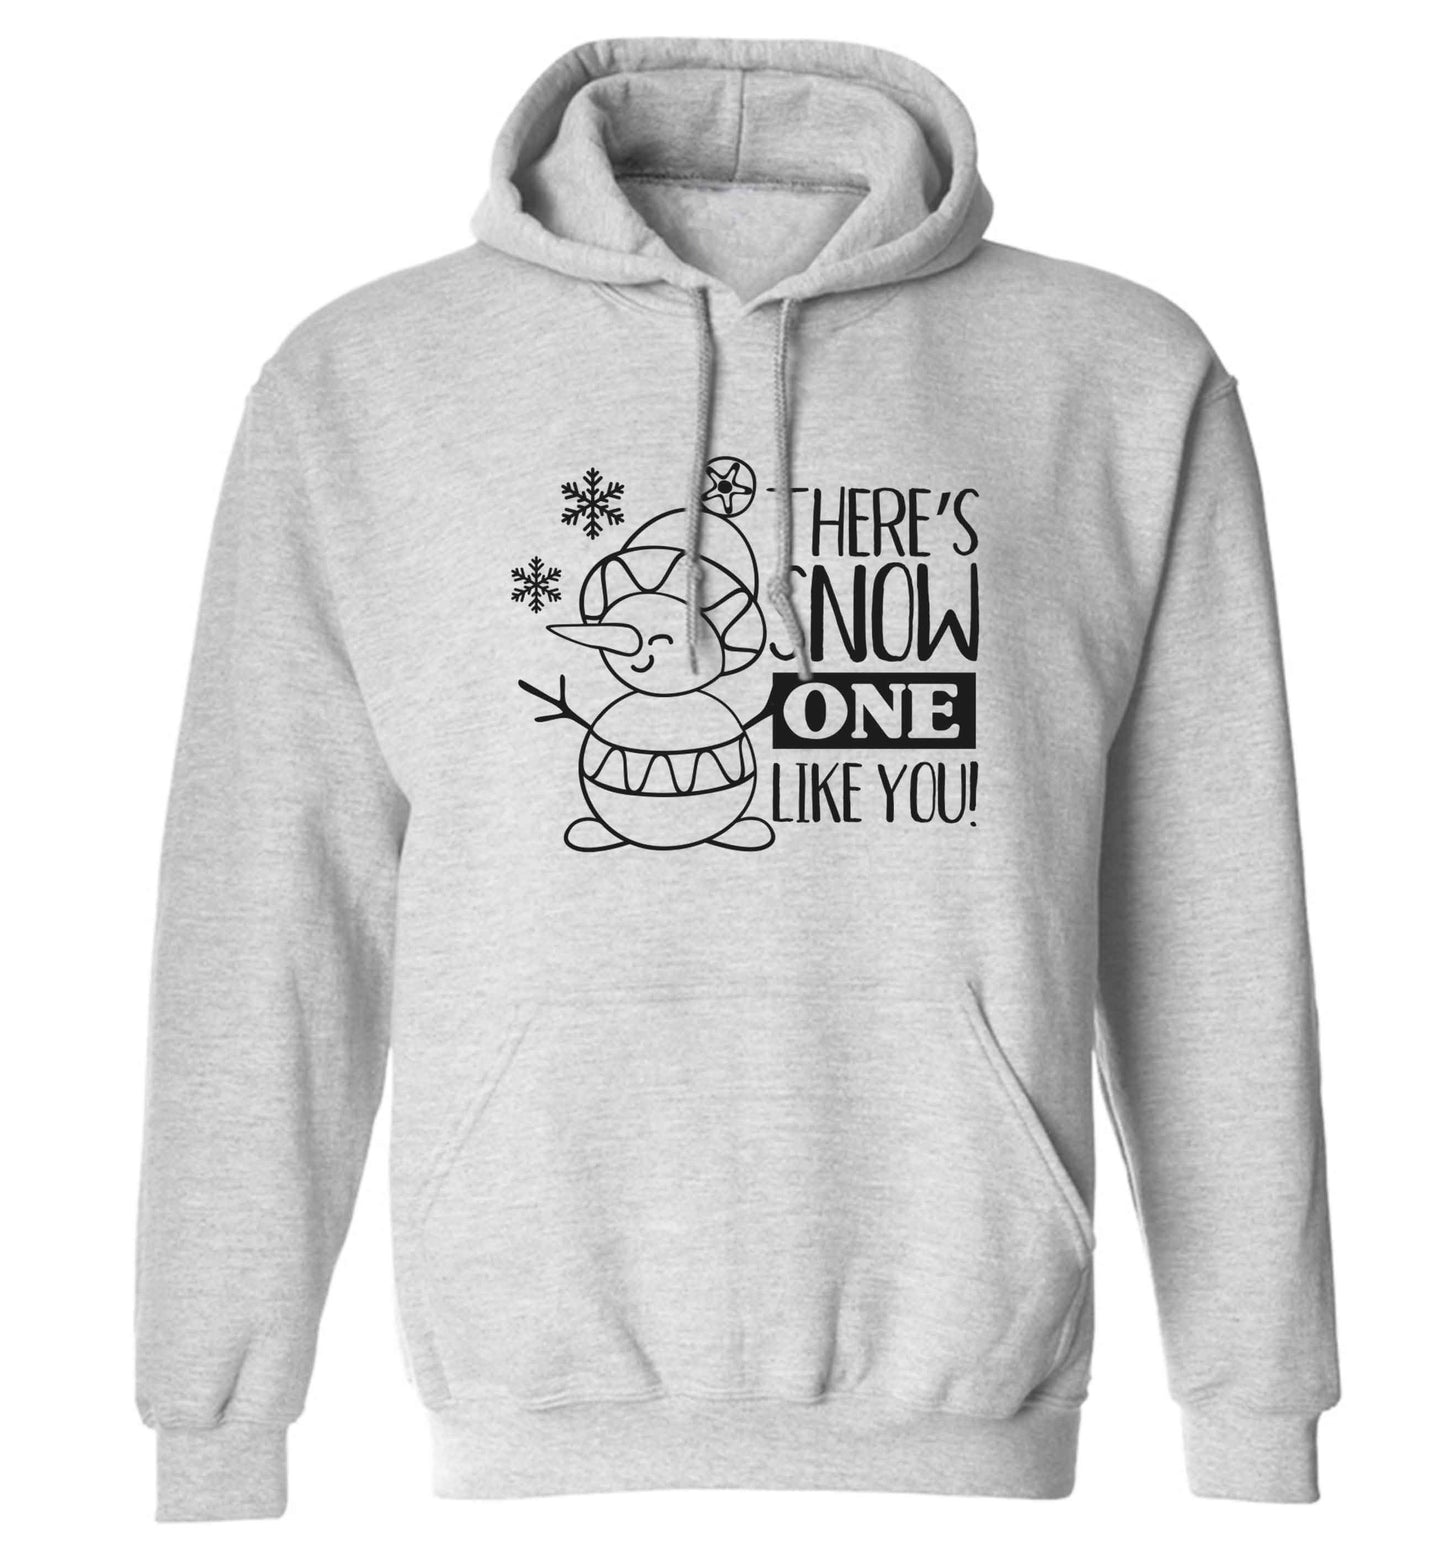 There's snow one like you adults unisex grey hoodie 2XL